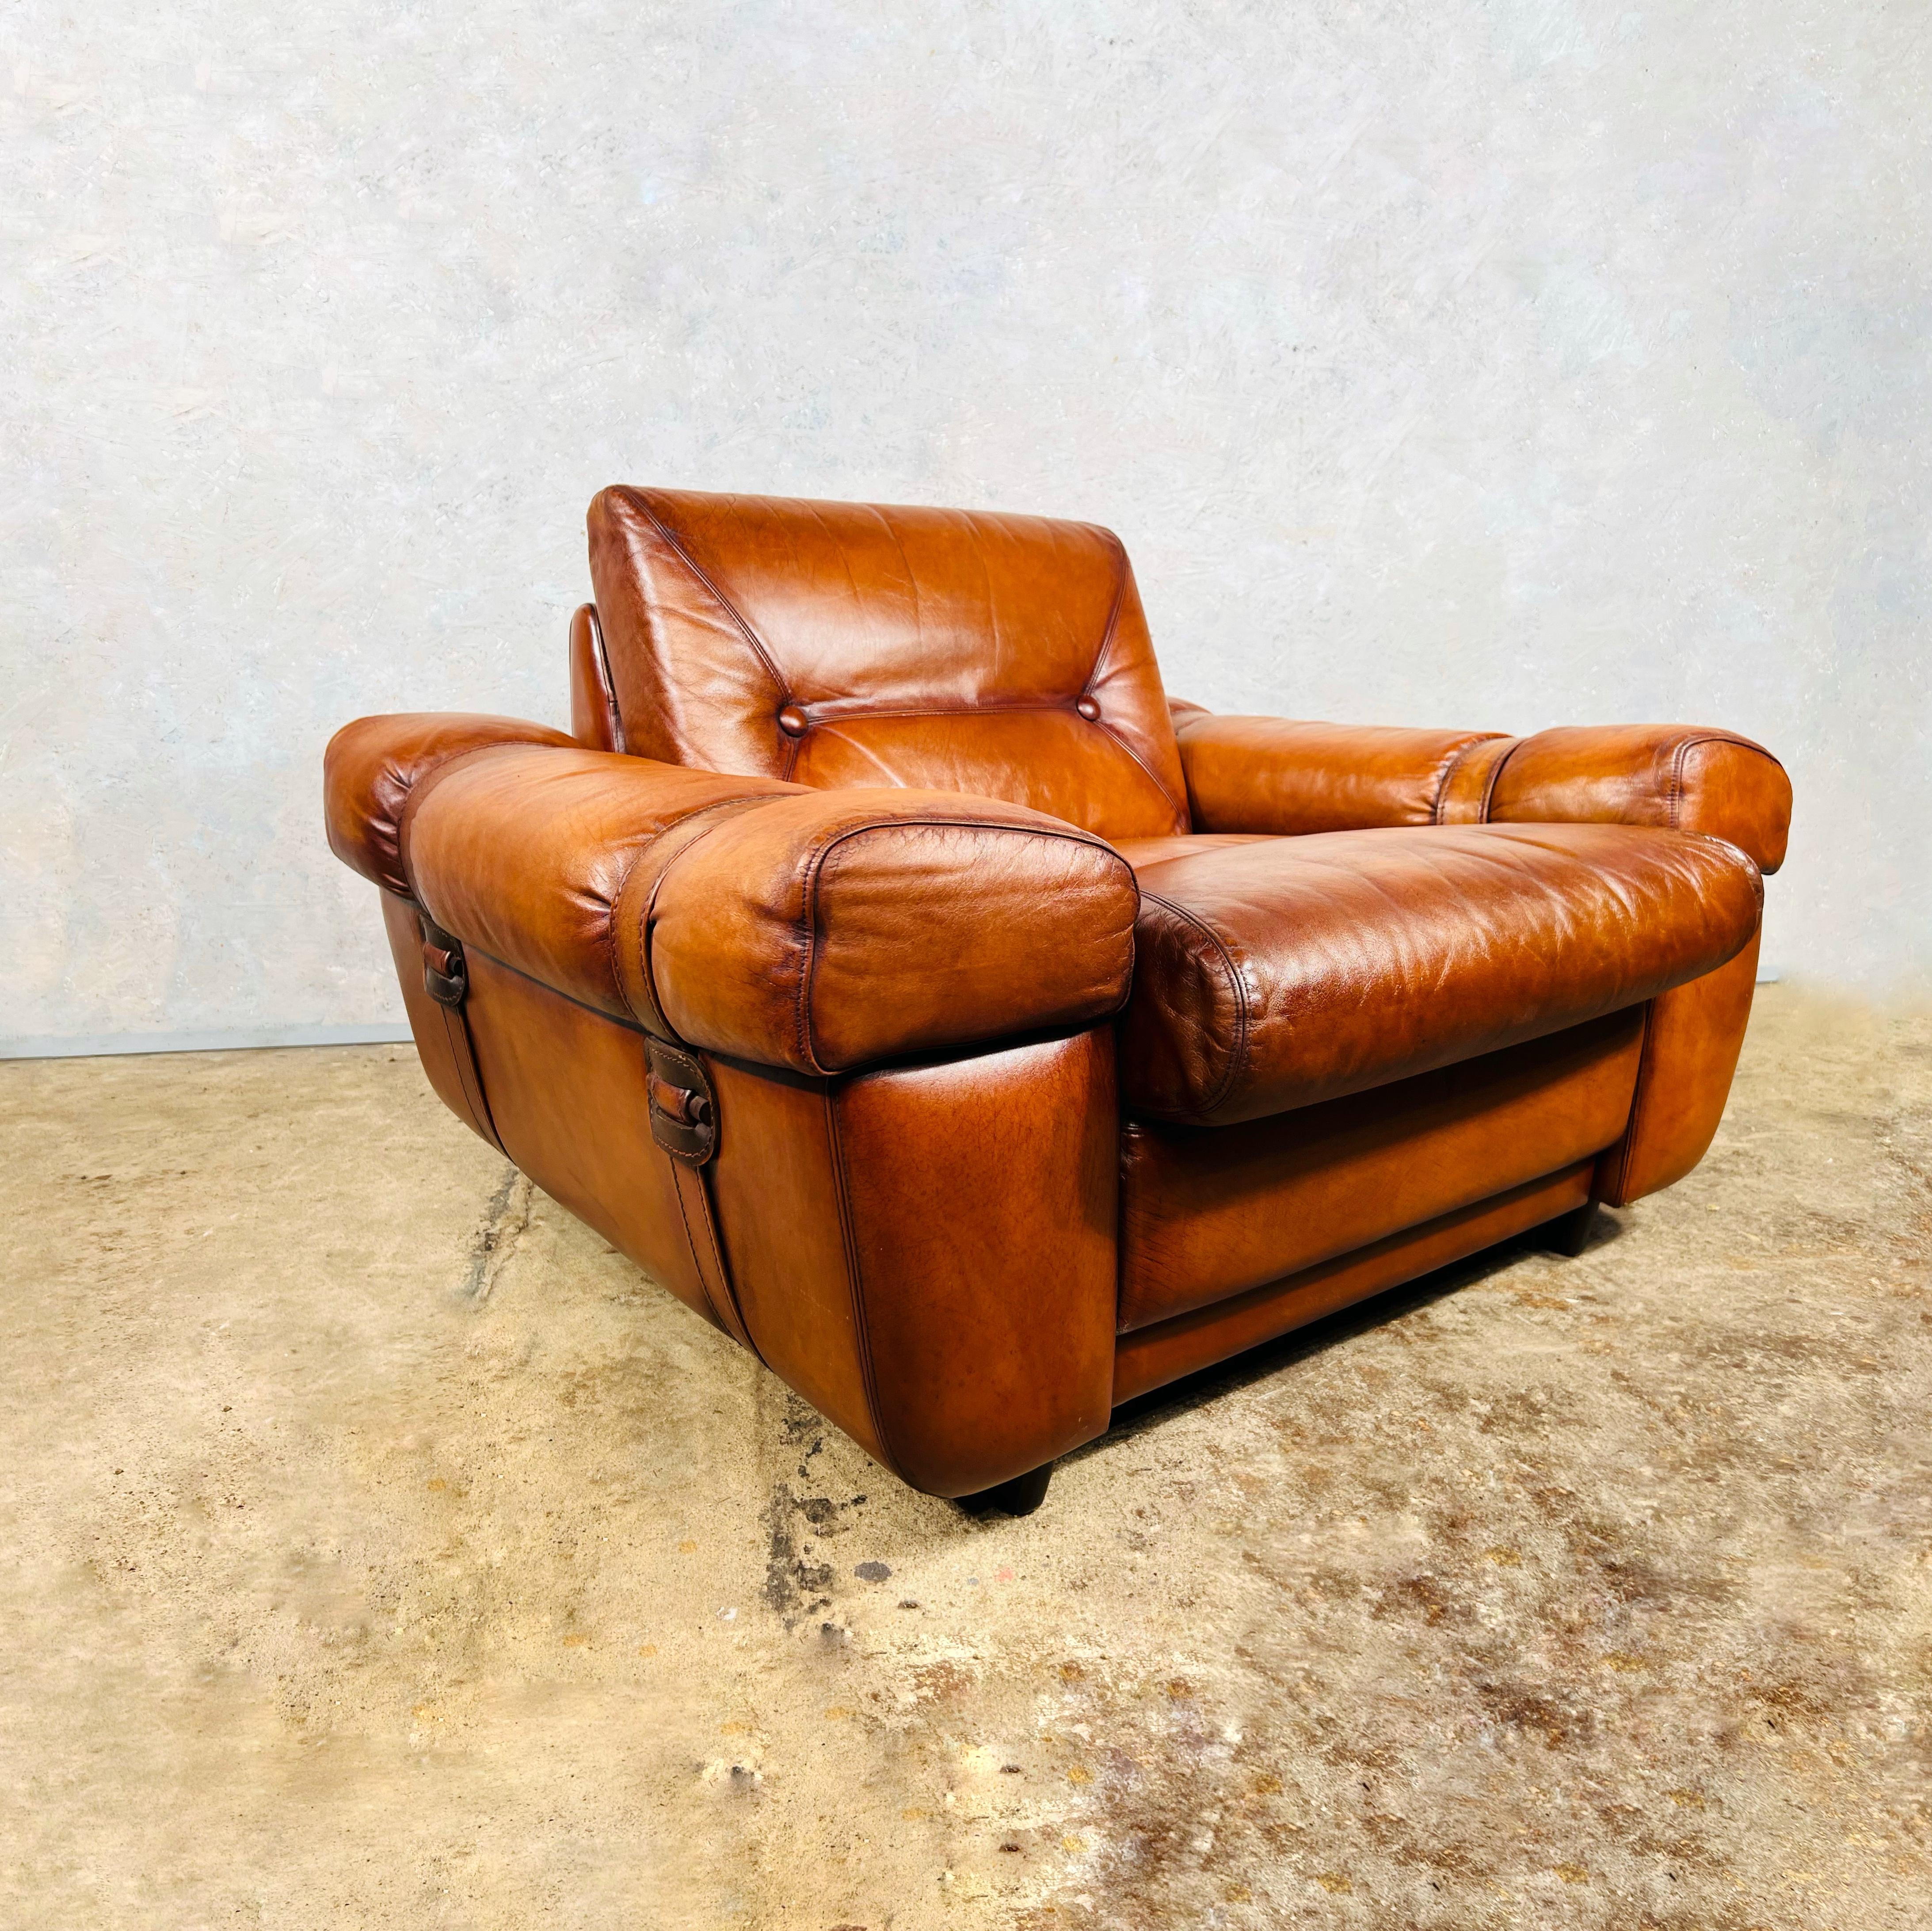 Fantastic vintage Svend Skipper leather chair in light tan with buckles
Very comfortable to sit in, stylish and lovely design, beautiful patinated light Tan hand dyed colour and finish. Great look.

In great condition.

Viewings welcome at our